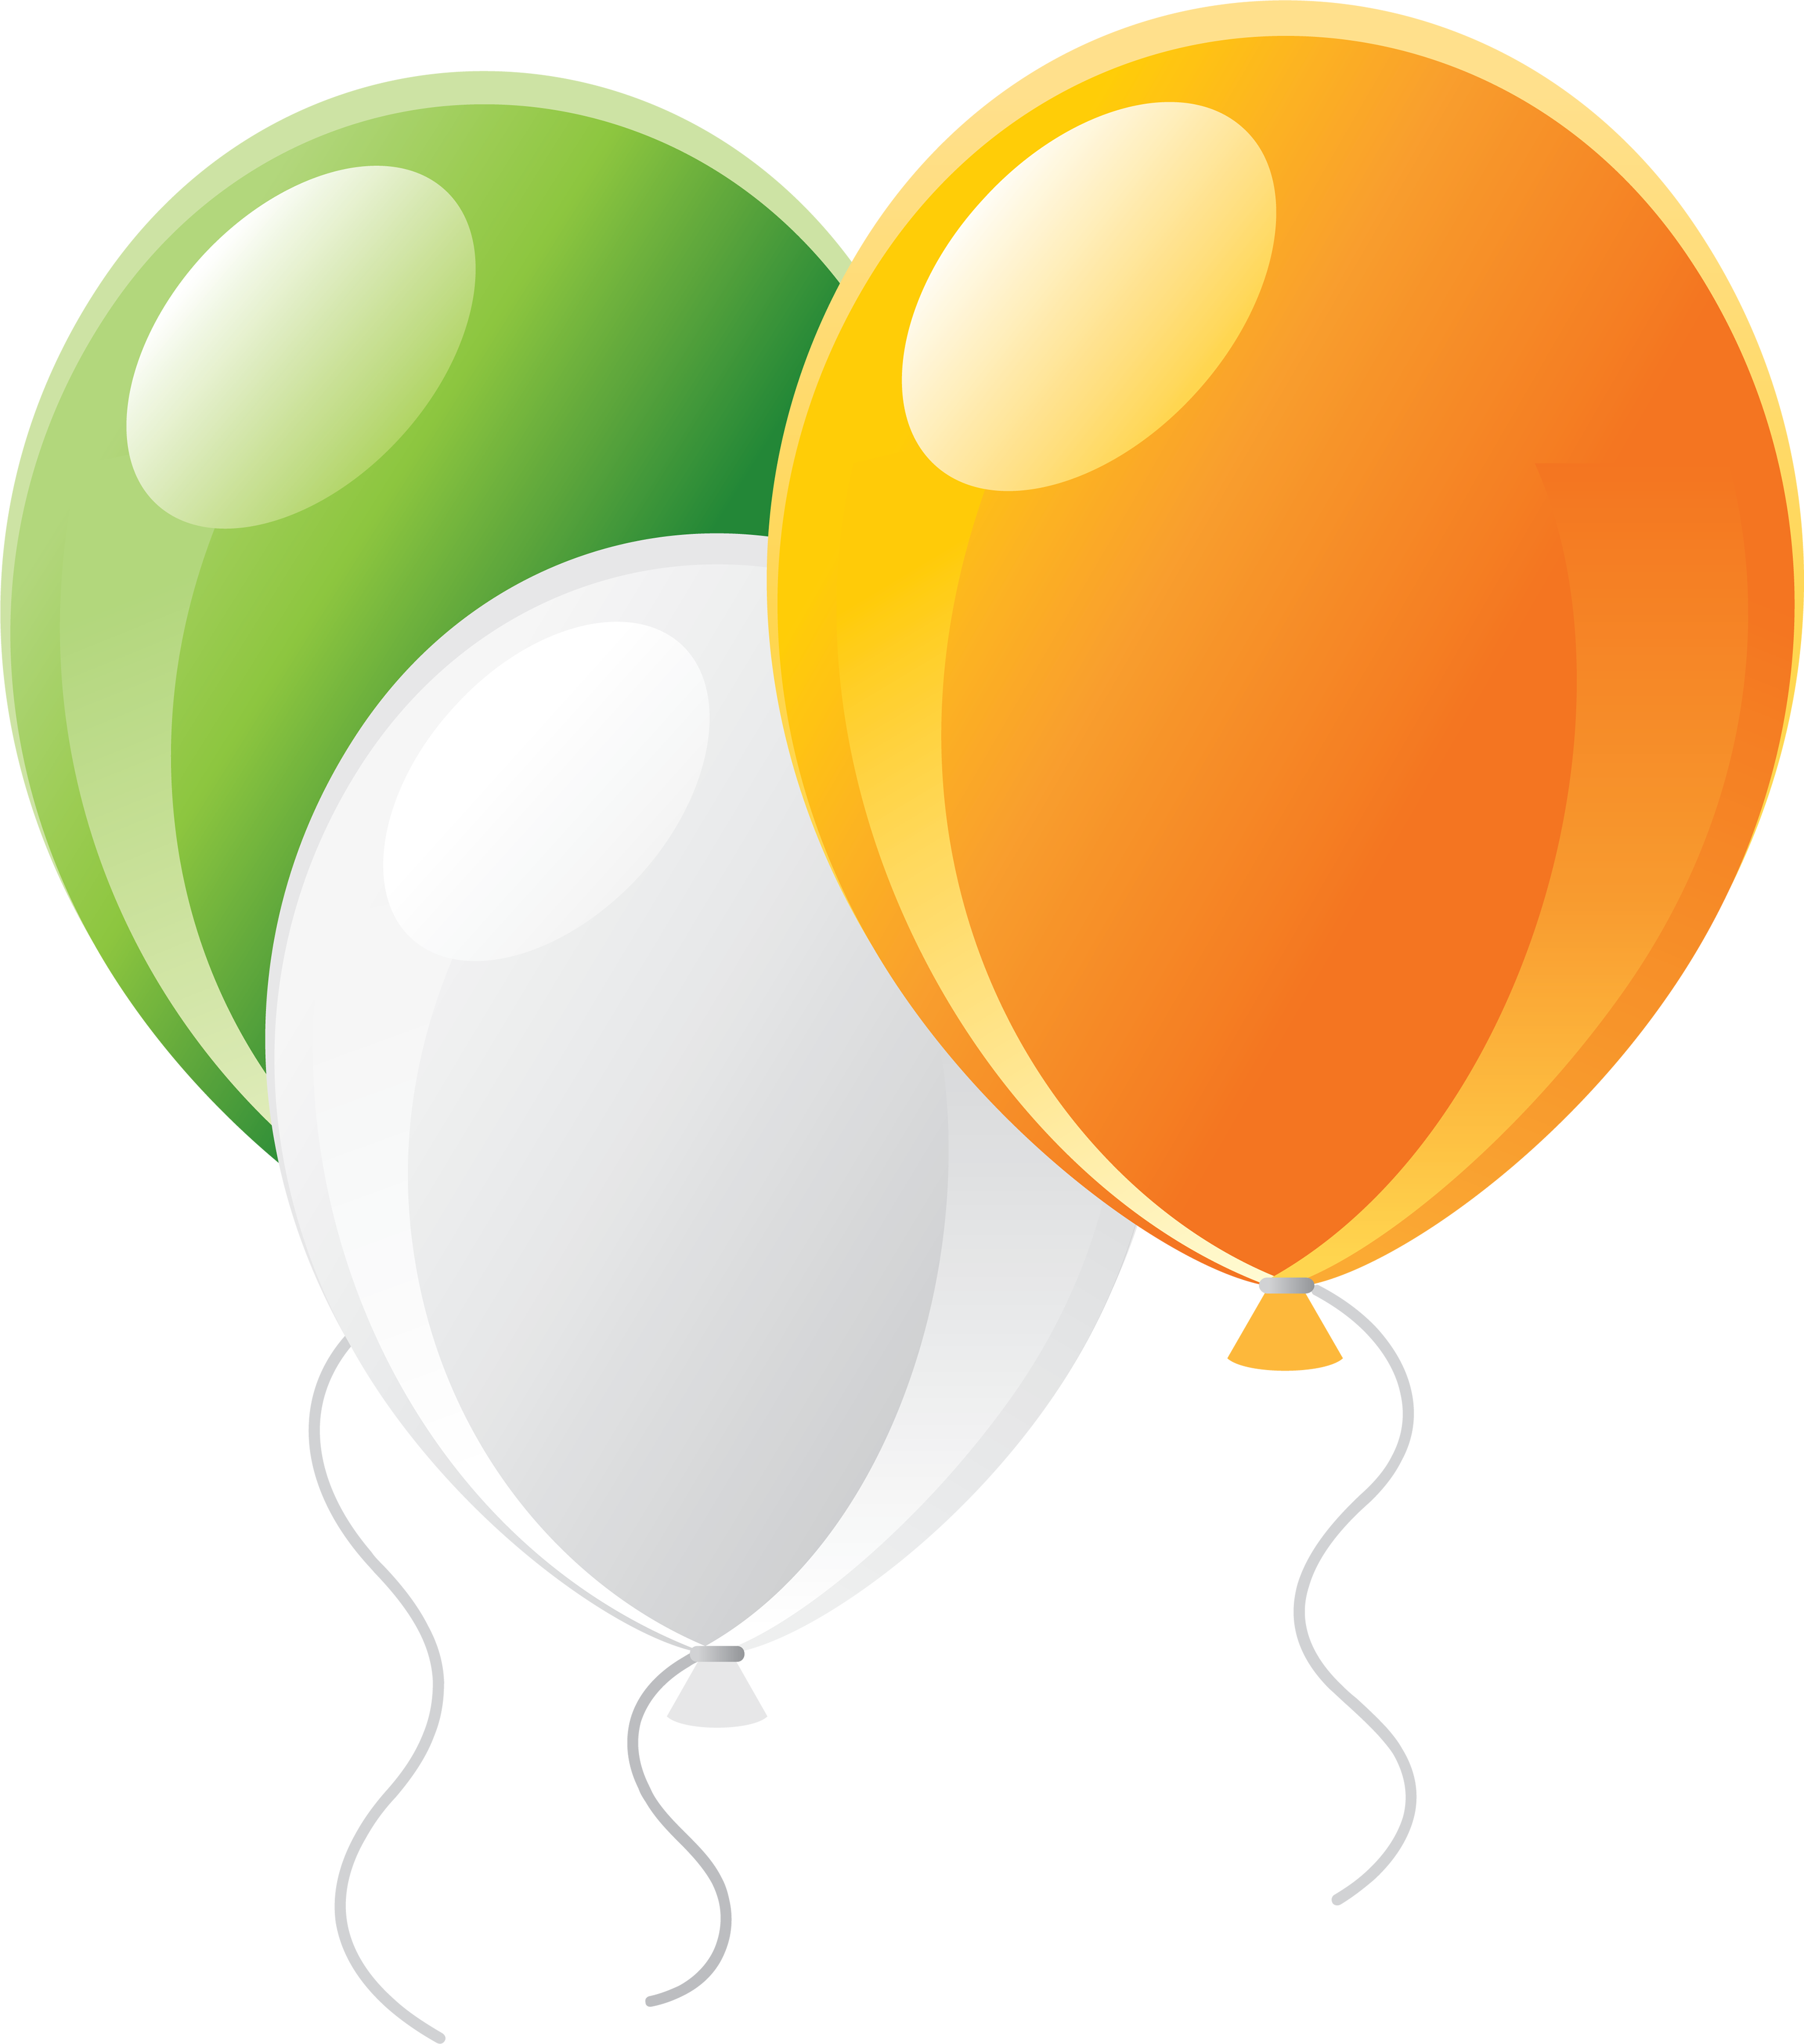 Italian Flag Colored Balloons PNG Image